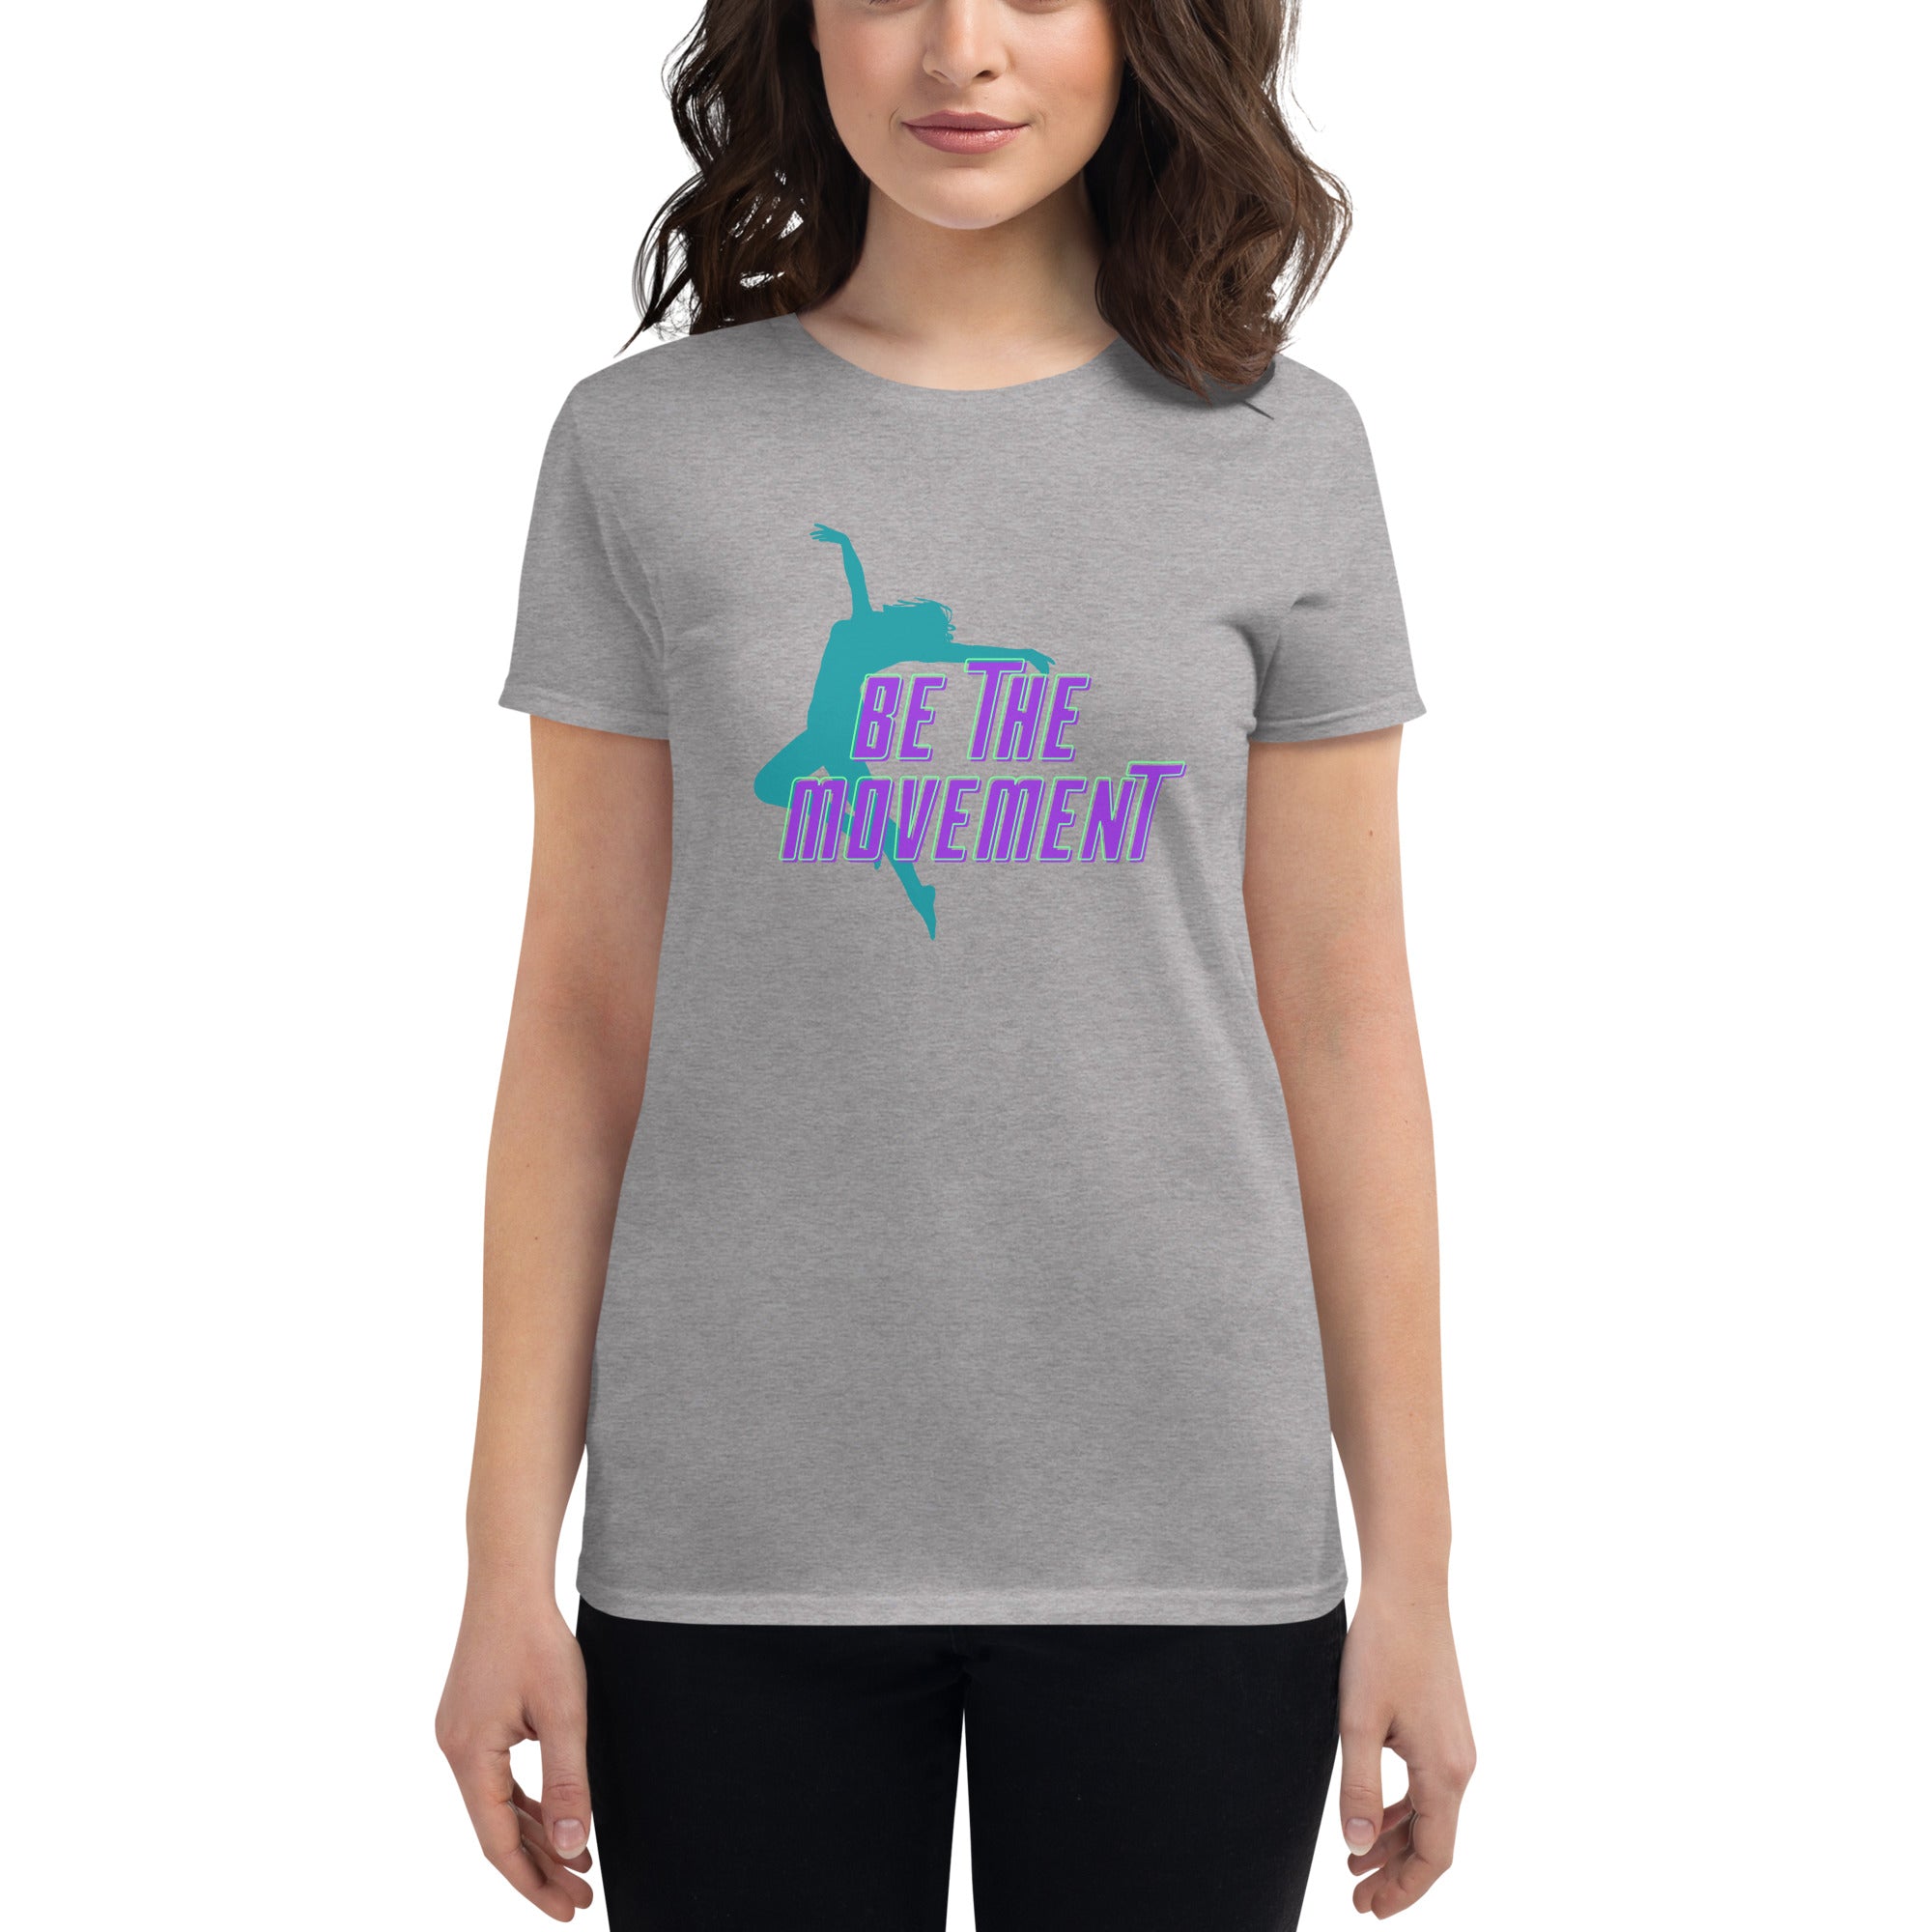 Be The Movement Women's Fitted T-Shirt